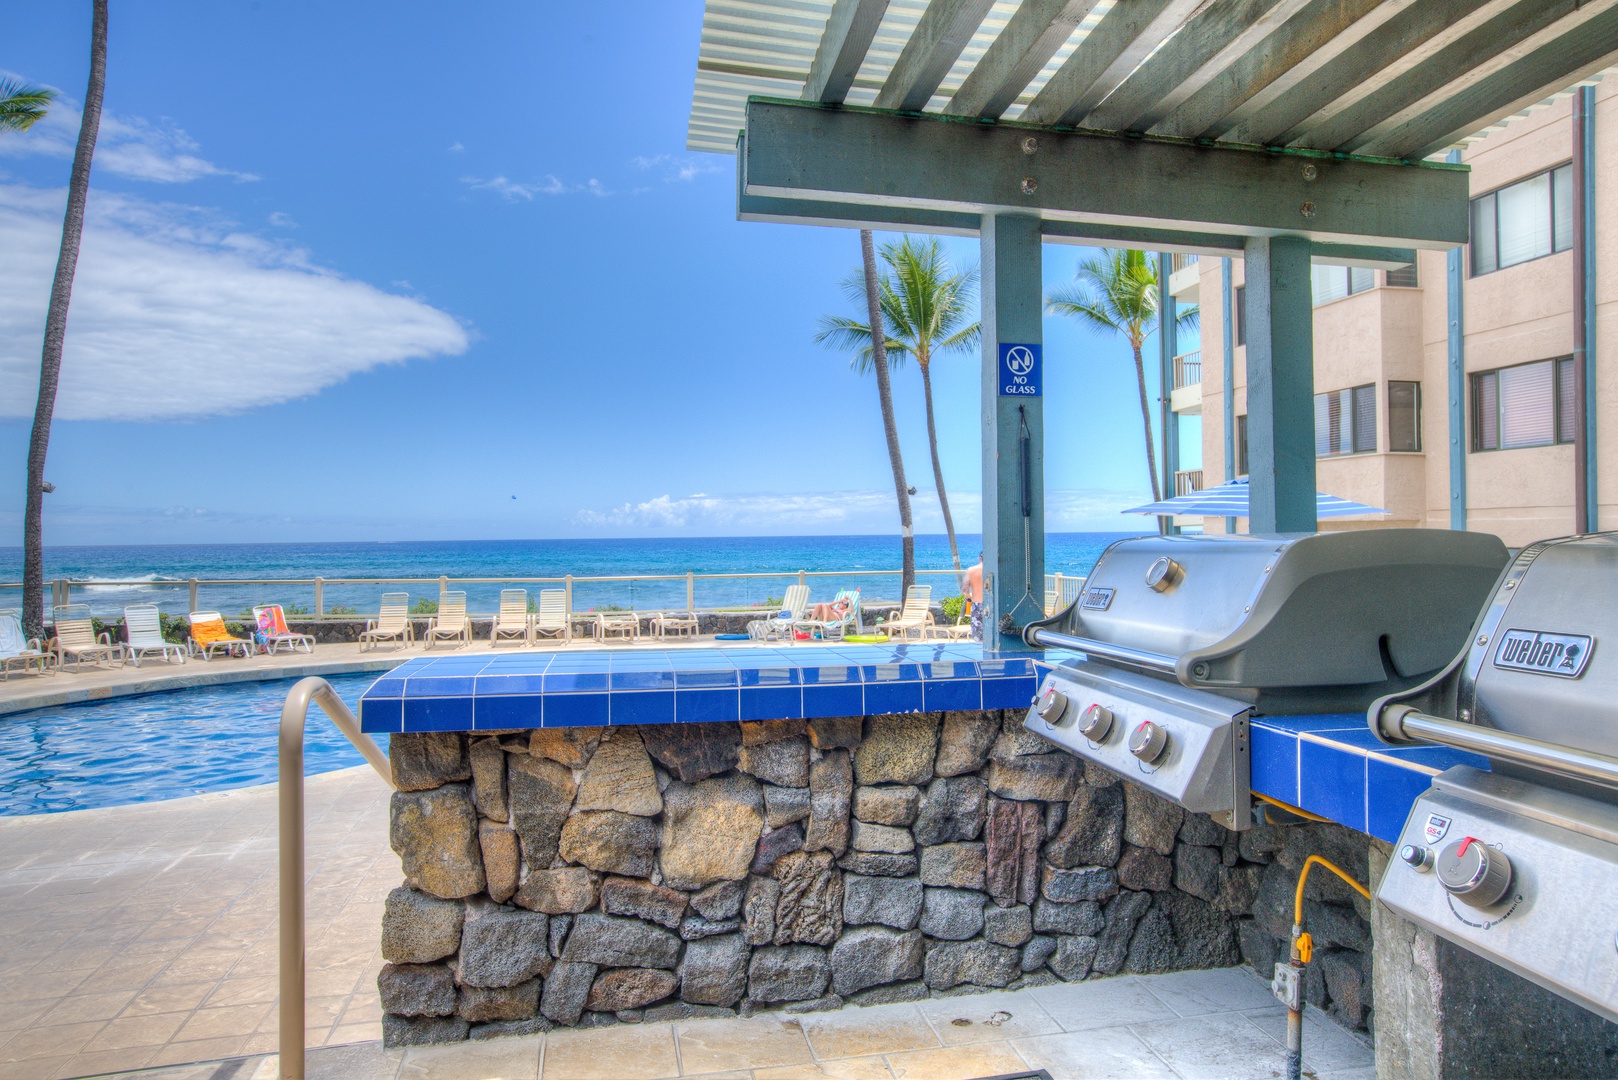 Kailua Kona Vacation Rentals, Kona Reef F11 - Lovely Oceanfront Pool Area with Spa and Barbecue Facilities.